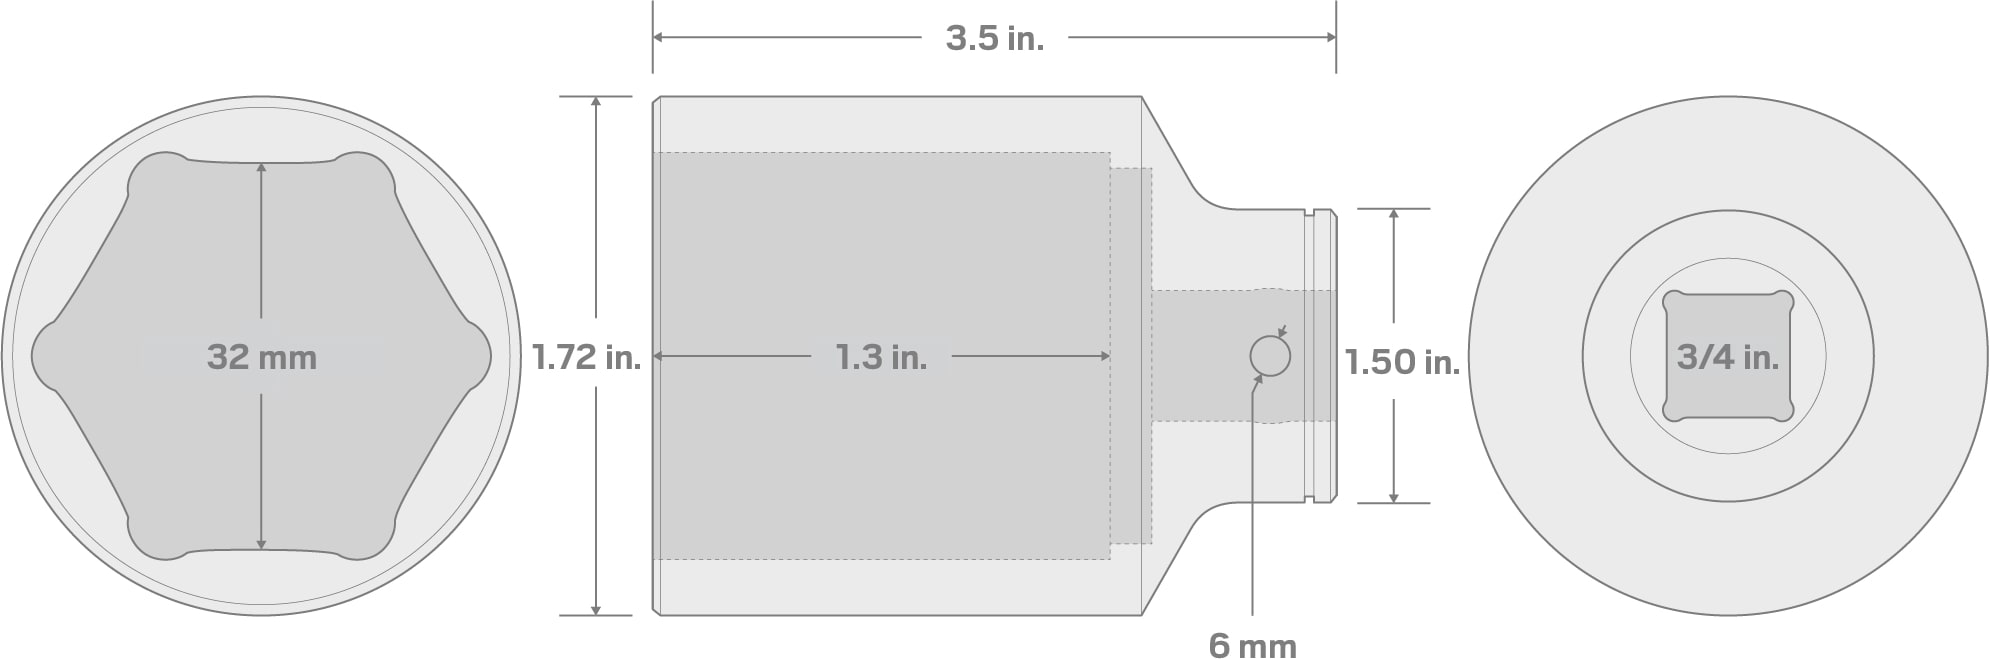 Specs for 3/4 Inch Drive x 32 mm Deep 6-Point Socket